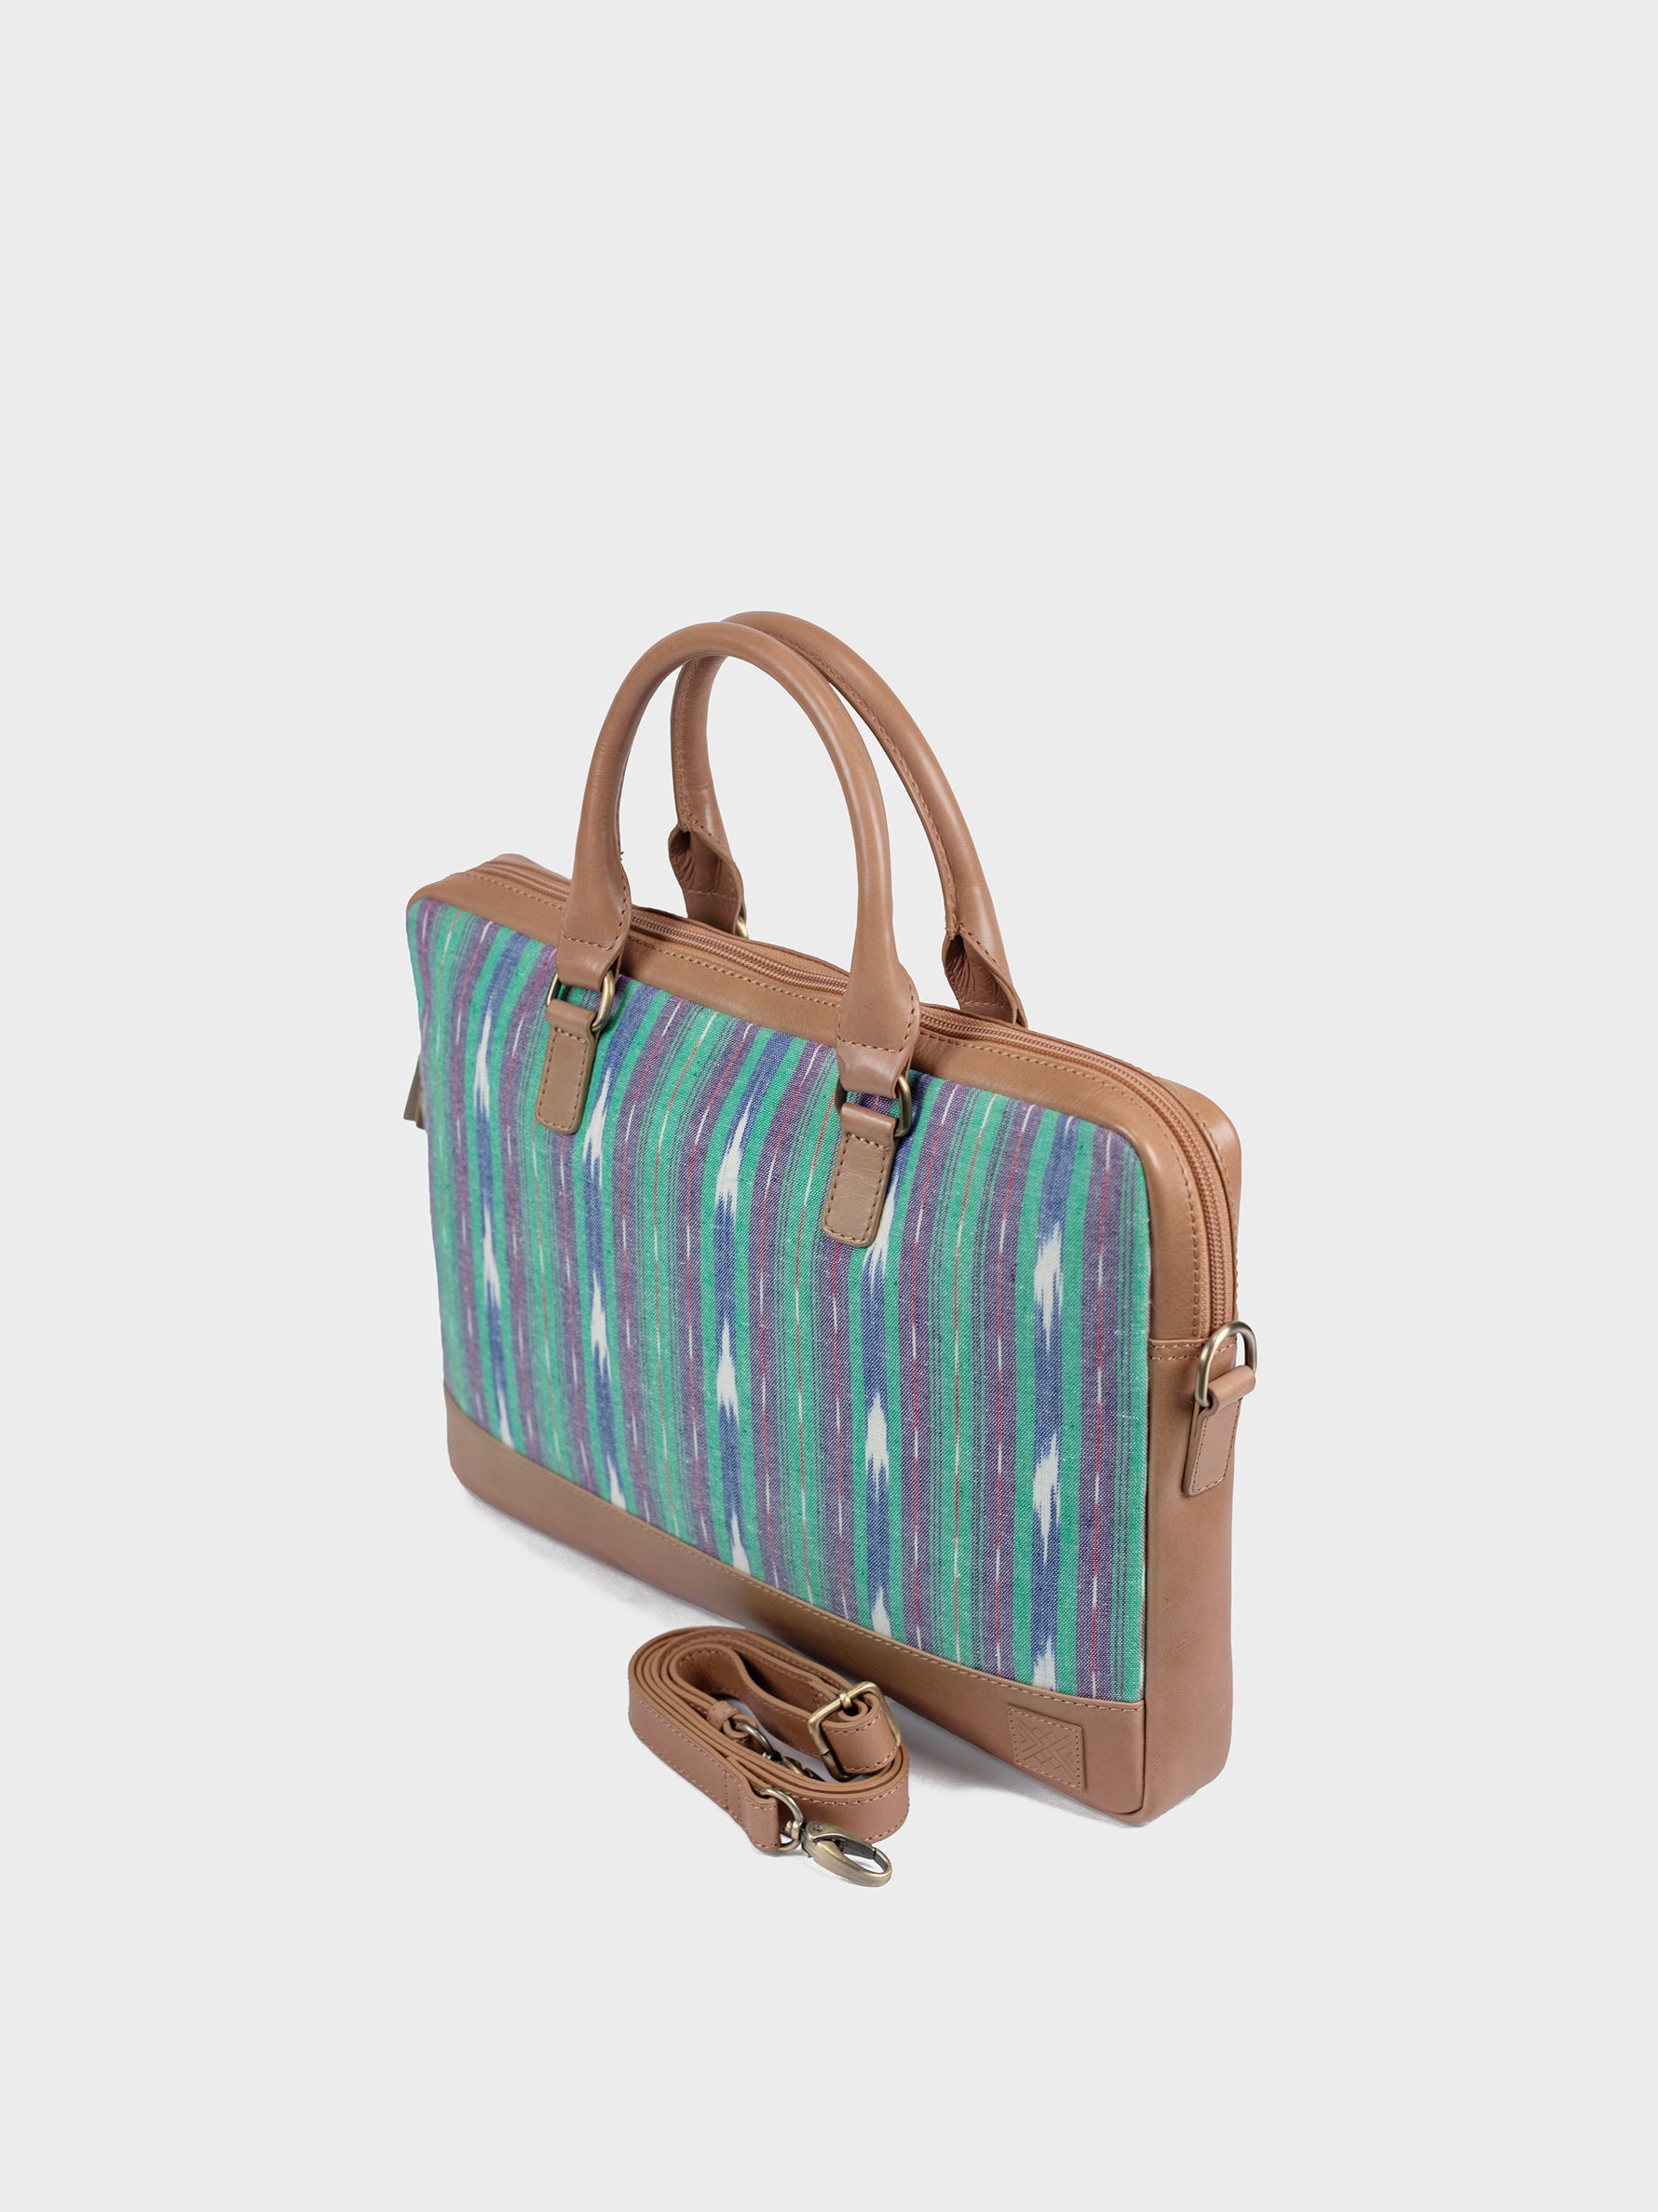 Handcrafted Premium Vegetable Tanned Leather & Ikat Teal Blue Laptop Bag for Women Tan & Loom